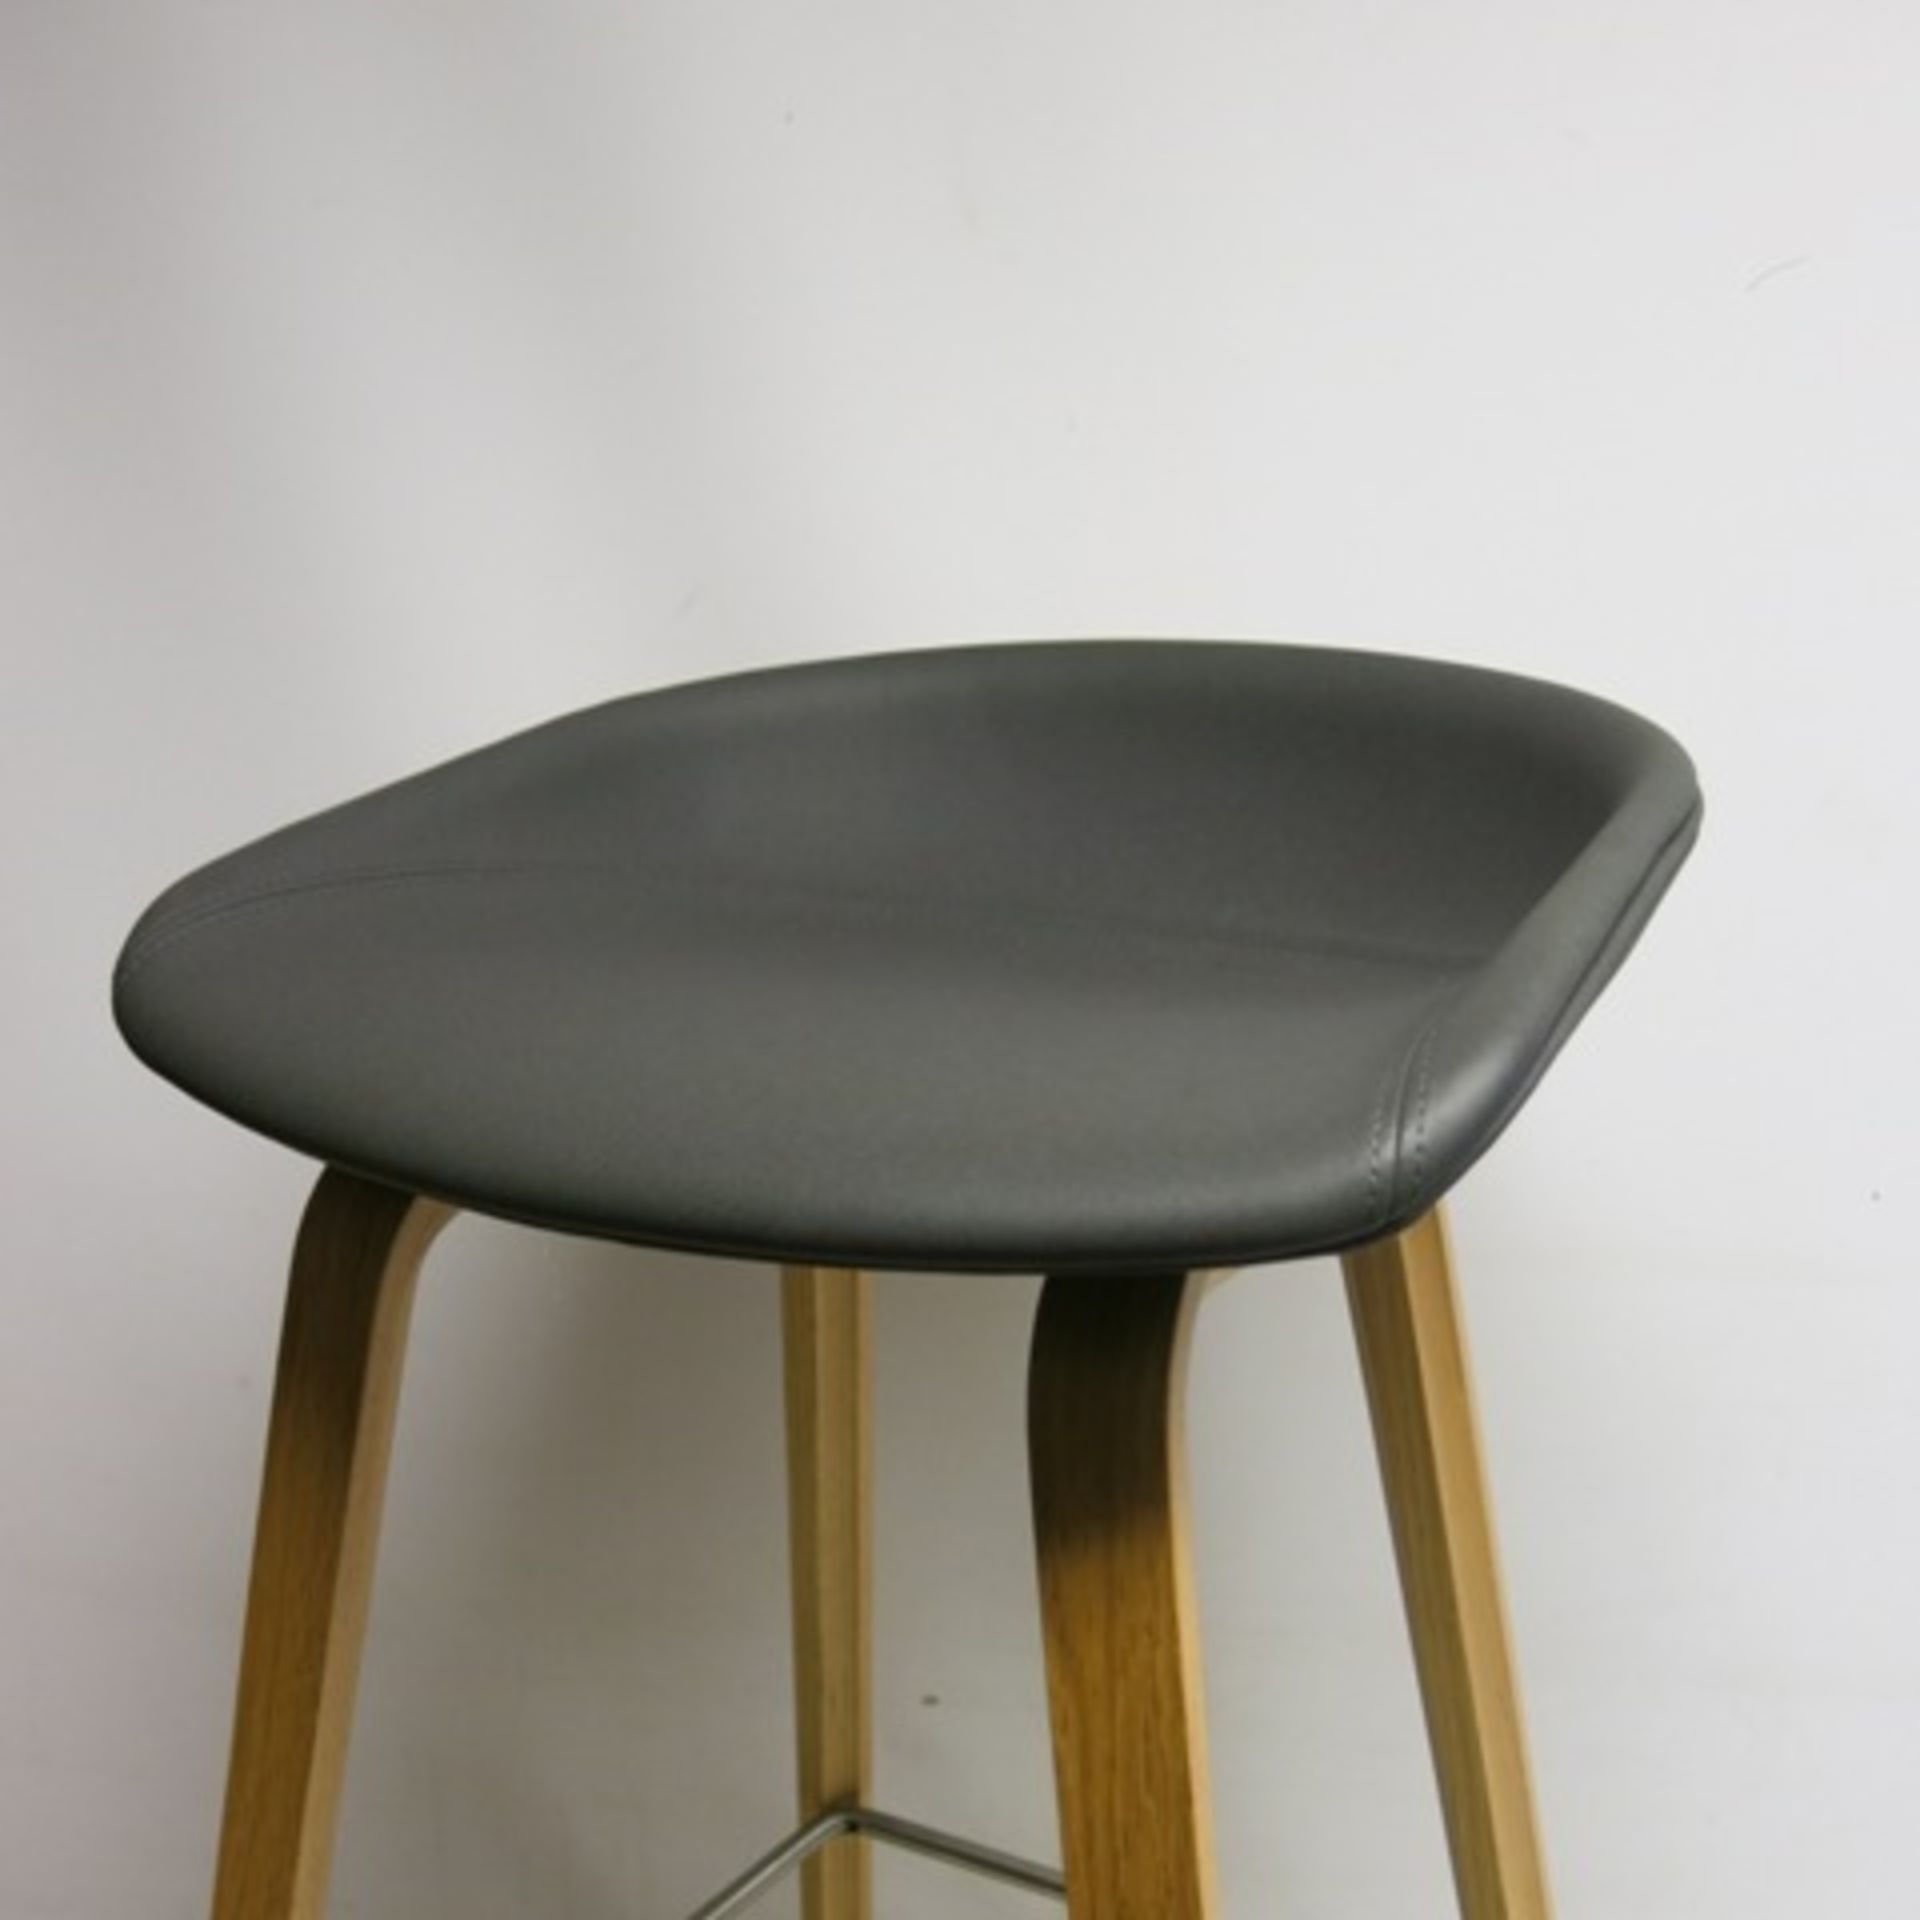 Designer 'Hay' About A Stool Model AAS32 High Stool in Matt Lacquered Oak & Charcoal Grey Padded - Image 2 of 5